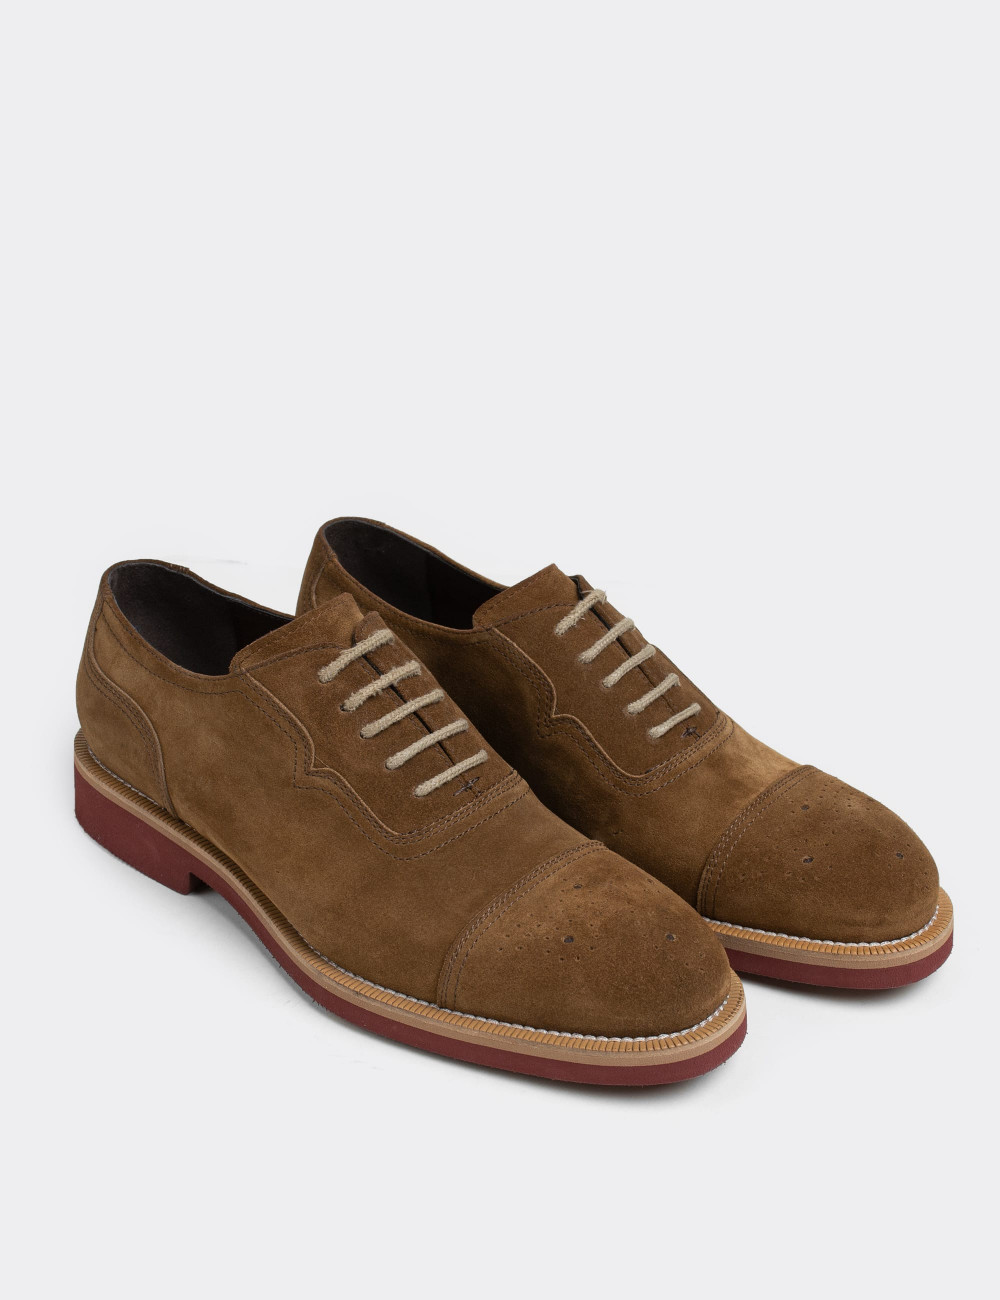 Tan Suede Leather Lace-up Shoes - 01687MTBAE02